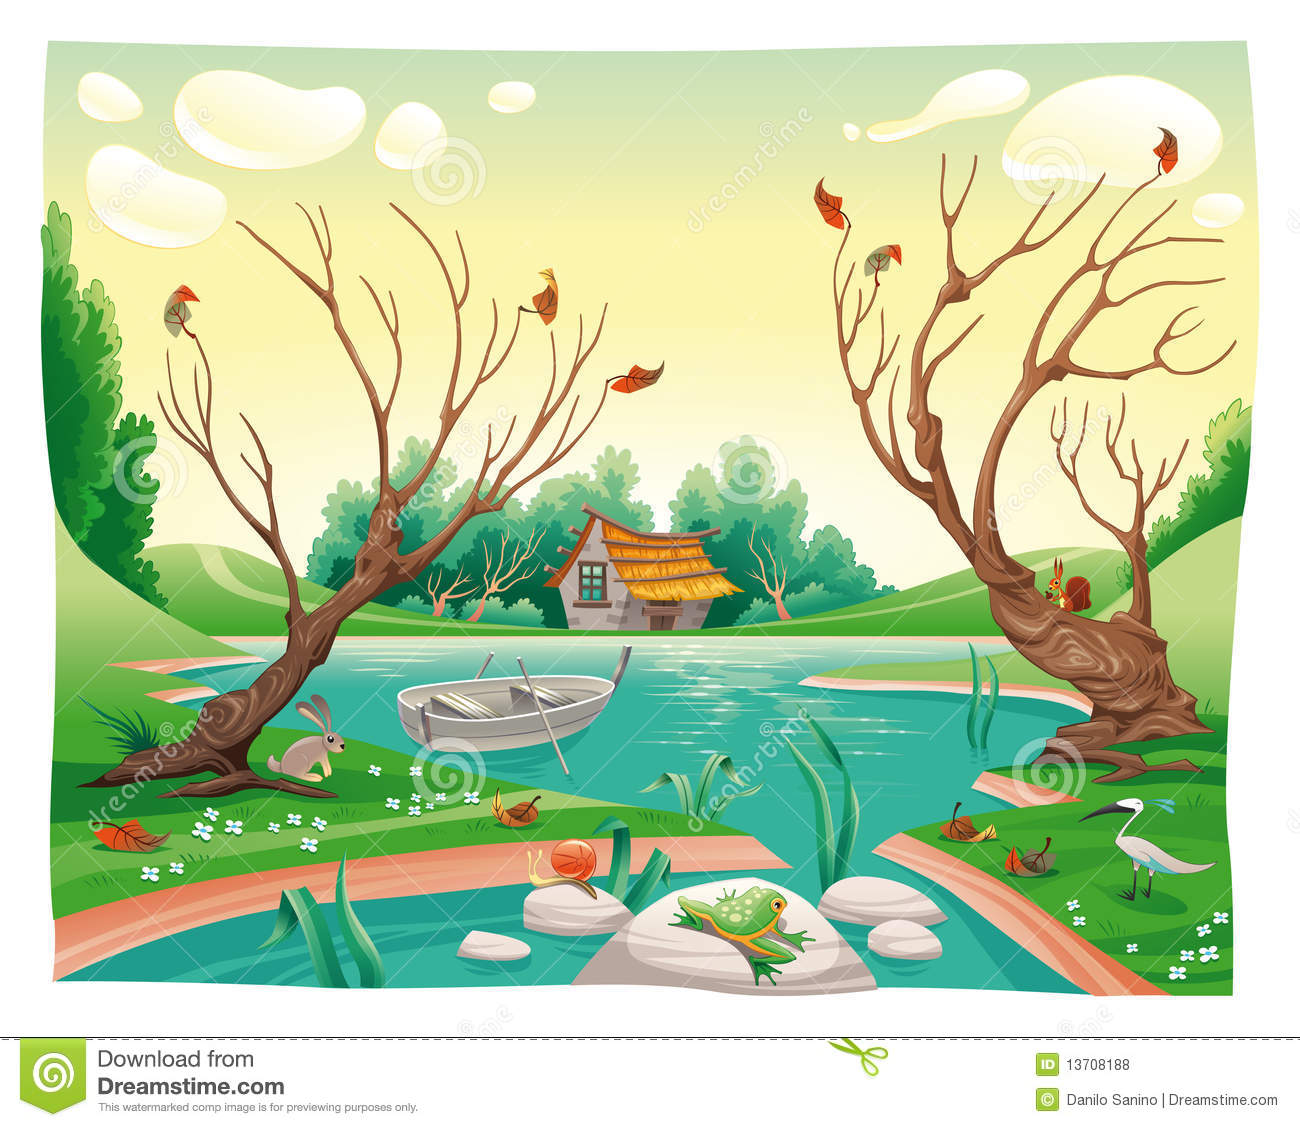 Pond And Animals  Royalty Free Stock Photos   Image  13708188